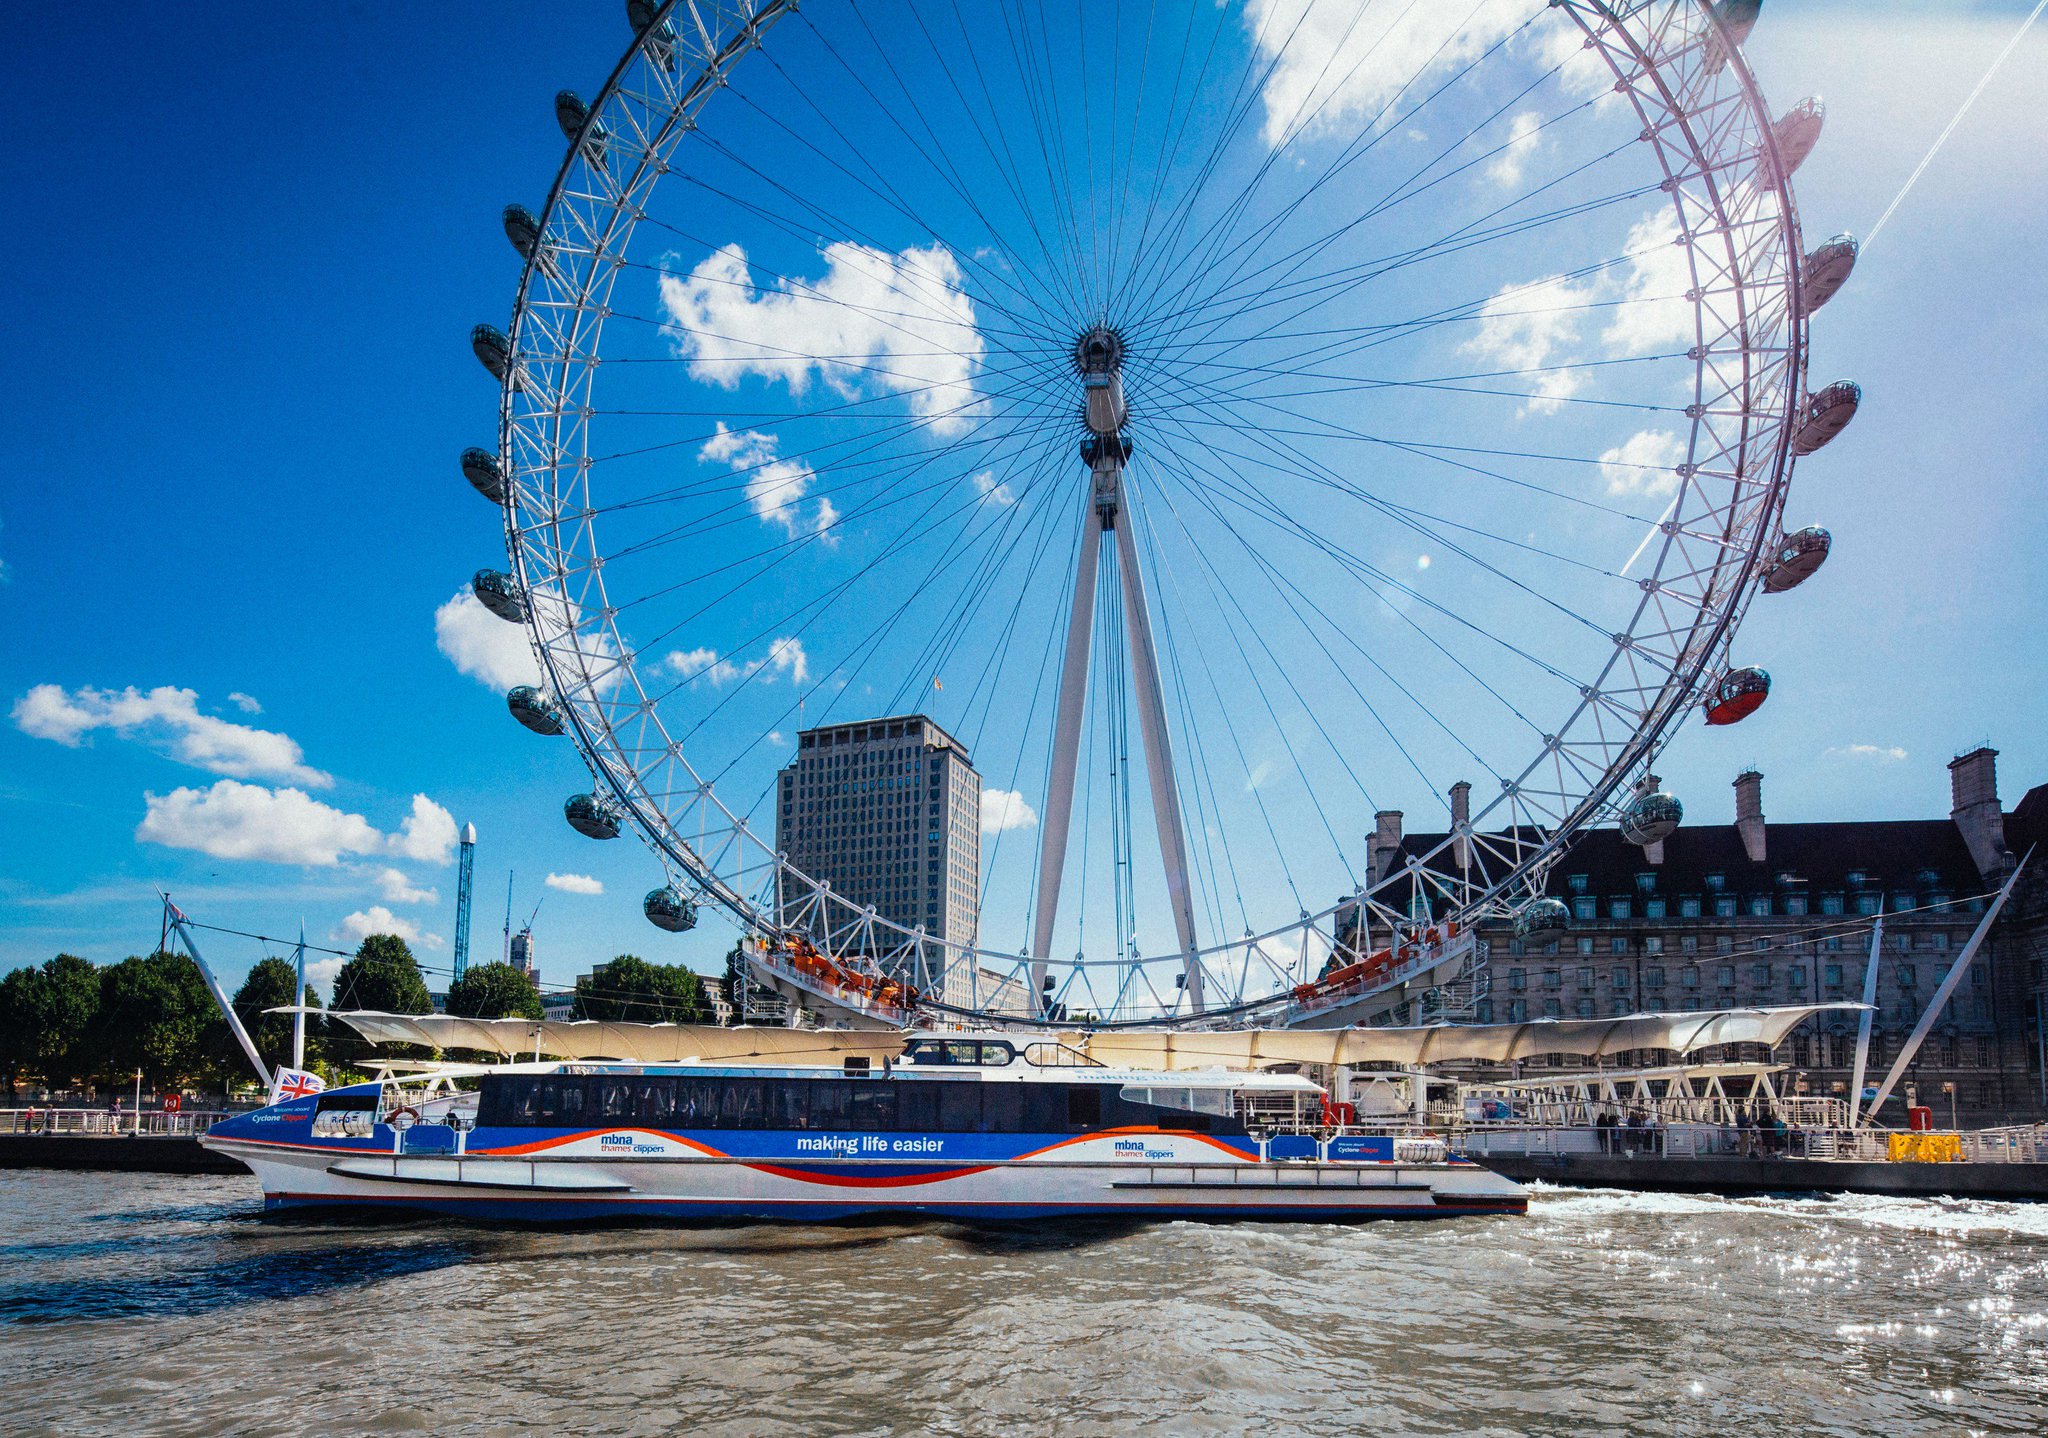 Mbna Thames Clippers On Twitter Travel By River And Make The Most Of A Day In London Popular